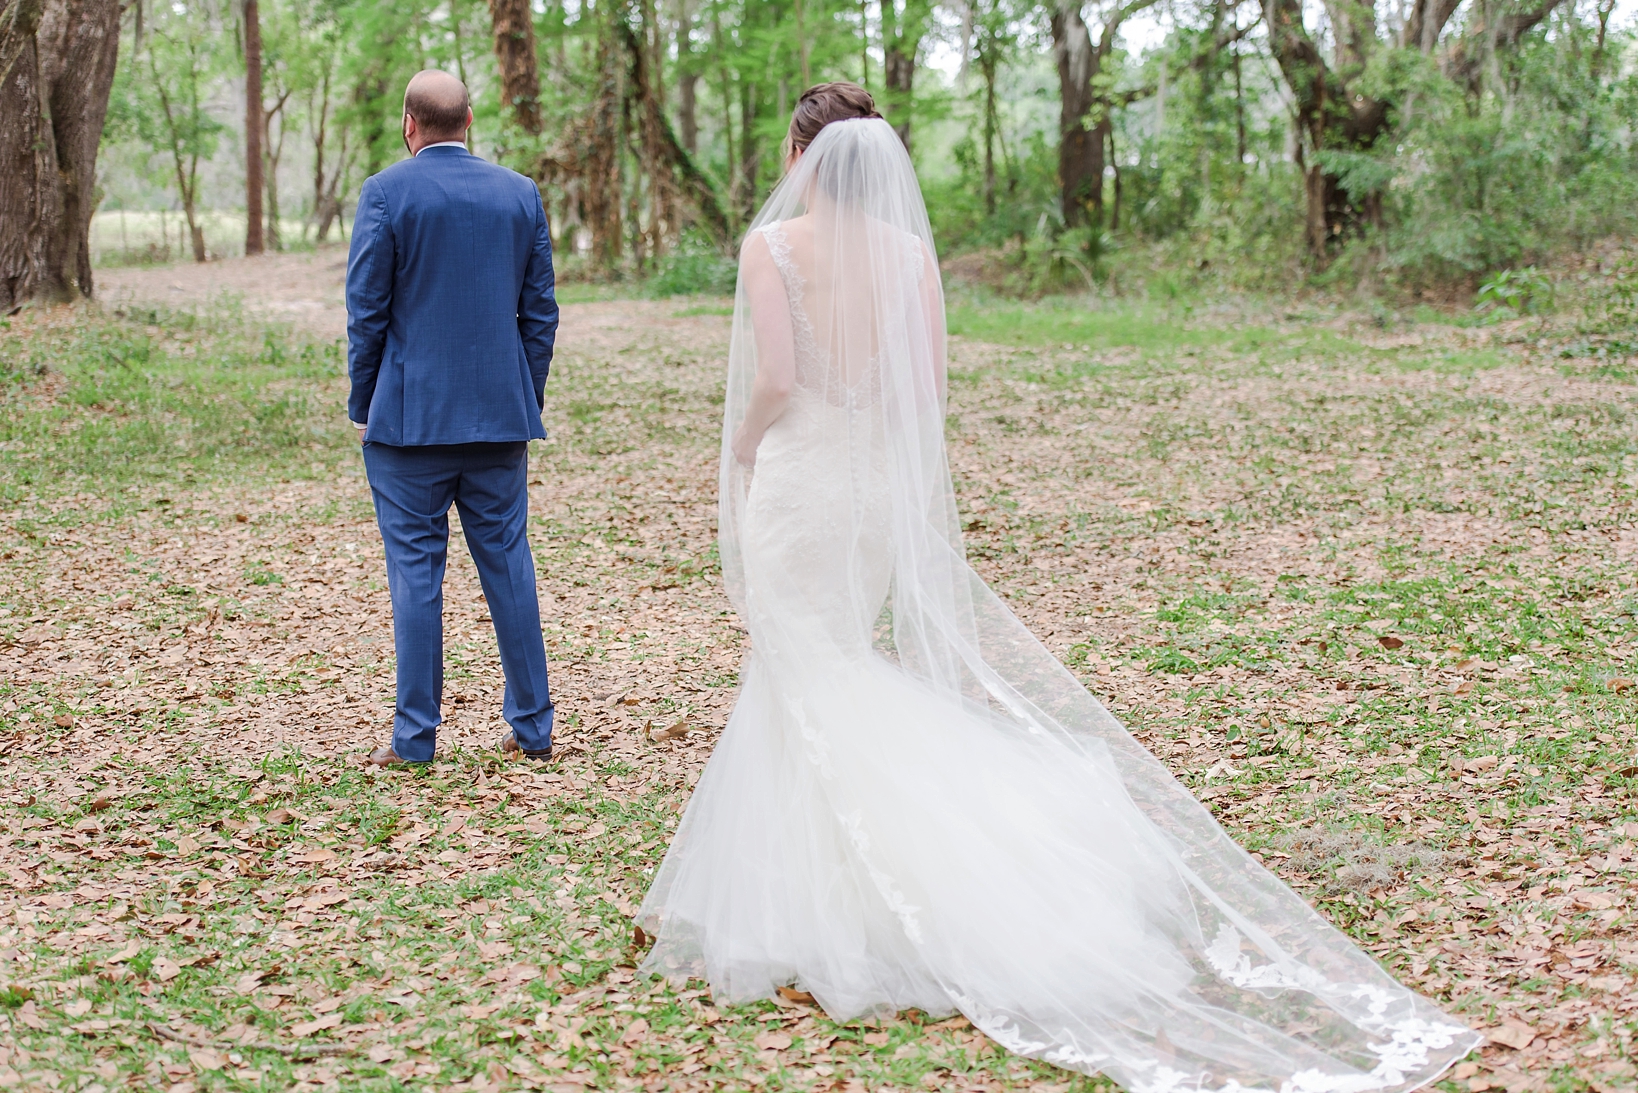 Bride walking up to her groom for their first look in a private rustic forest setting